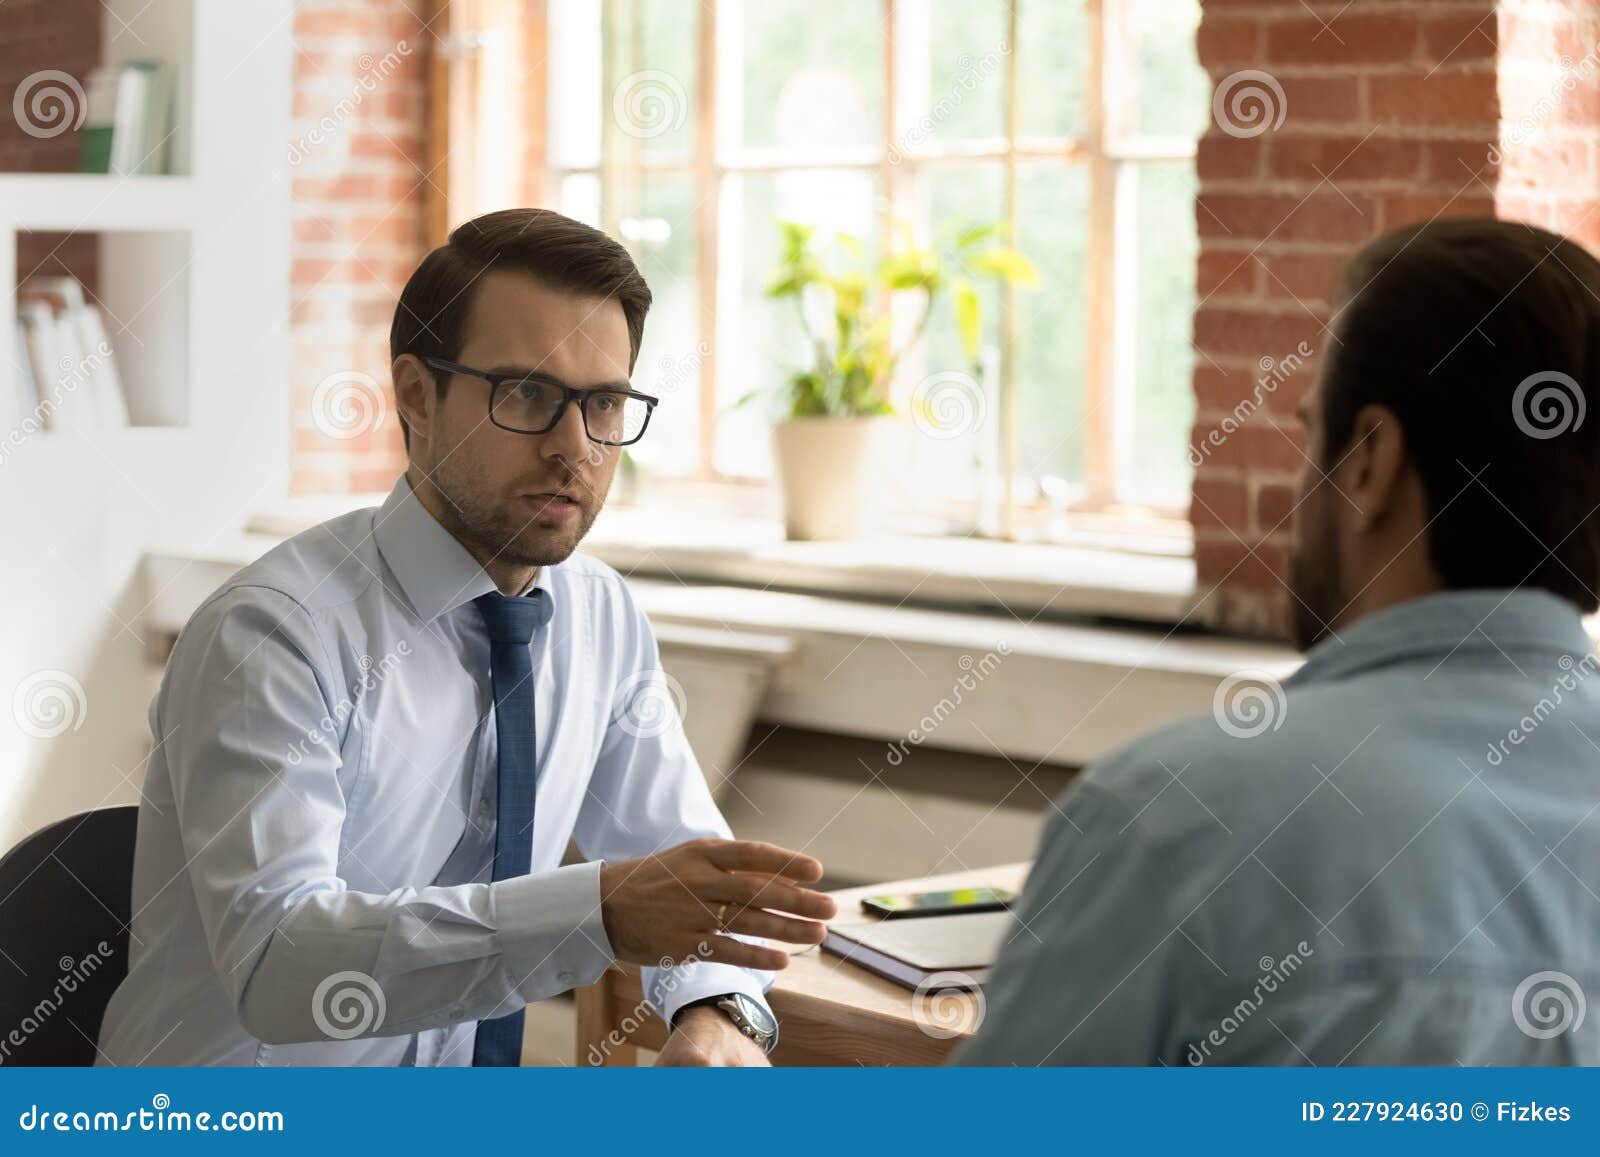 serious male colleagues discuss business seated at workplace desk